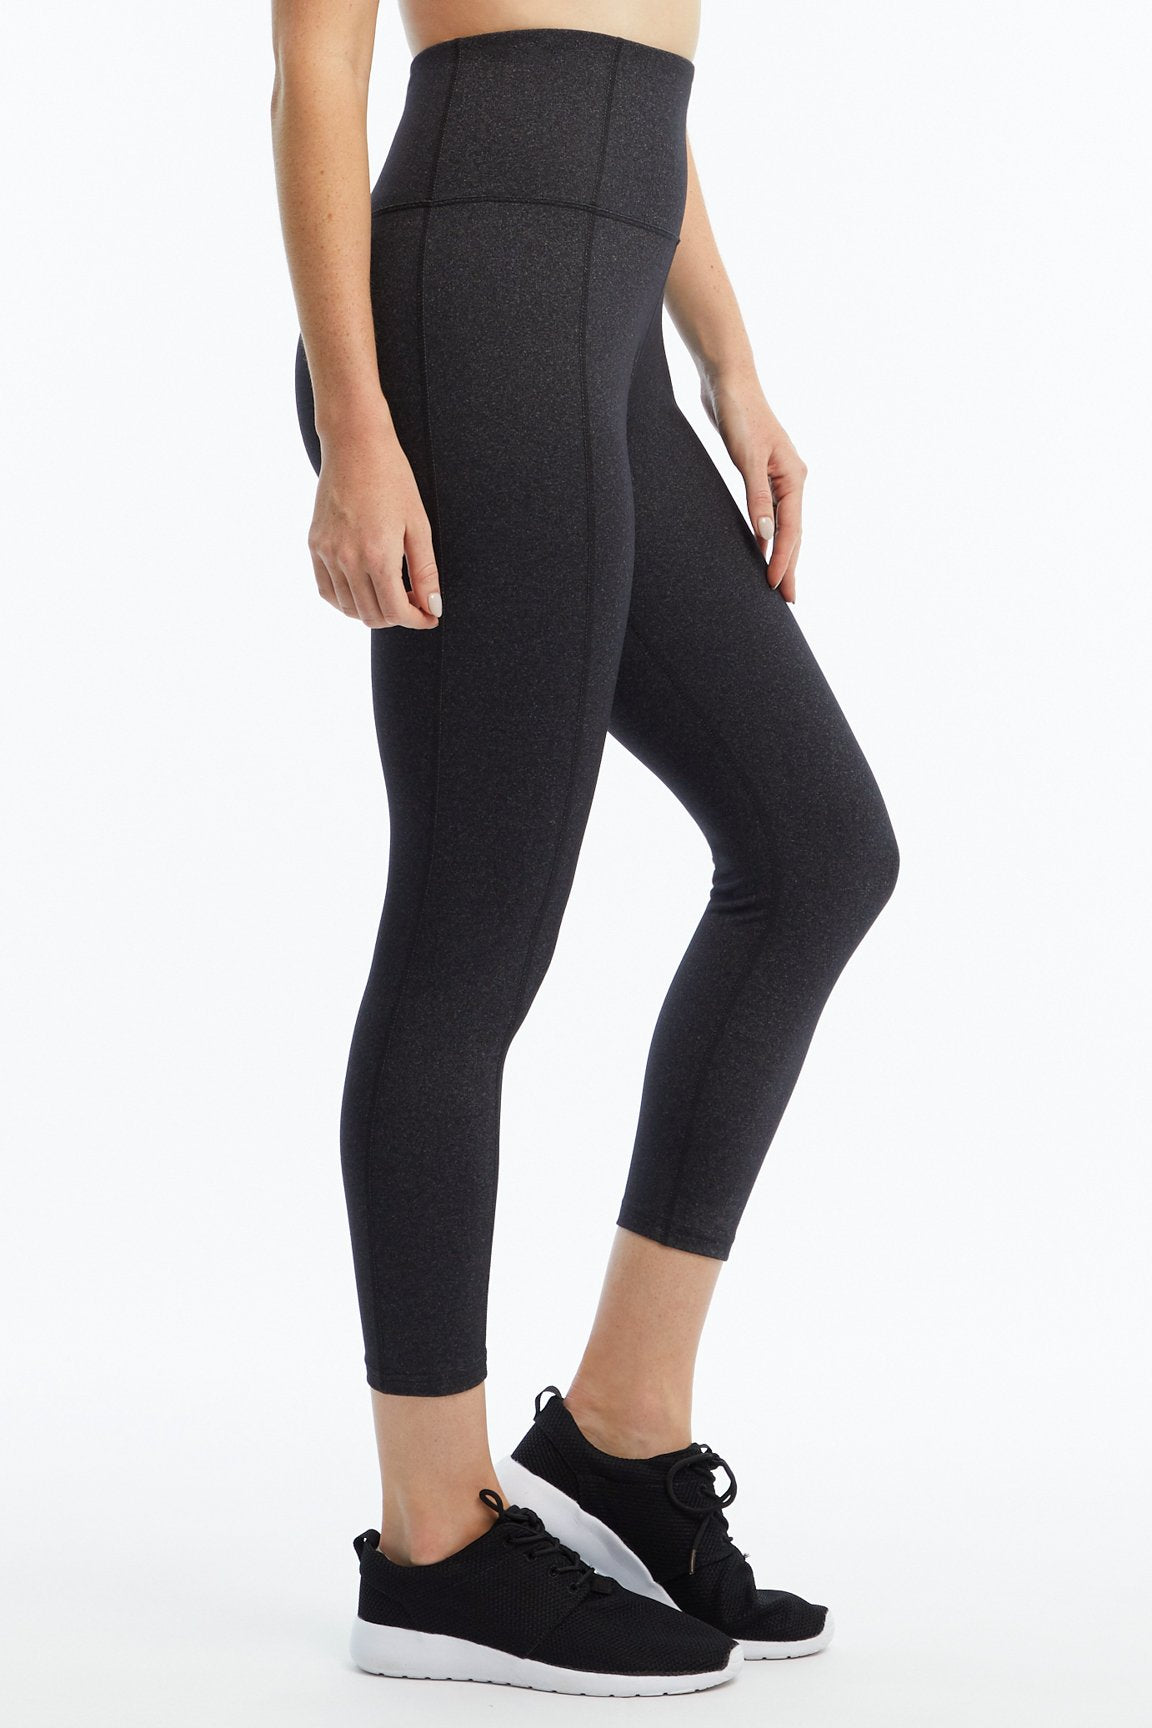 Women's Sculpted MID-Rise Capri Leggings 21' Made for: Interval Training,  High-Intensity Classes, Cardio, Spin and More Single Loop Drawstring, Side  Pockets - China Sports Leggings and Yoga Leggings price